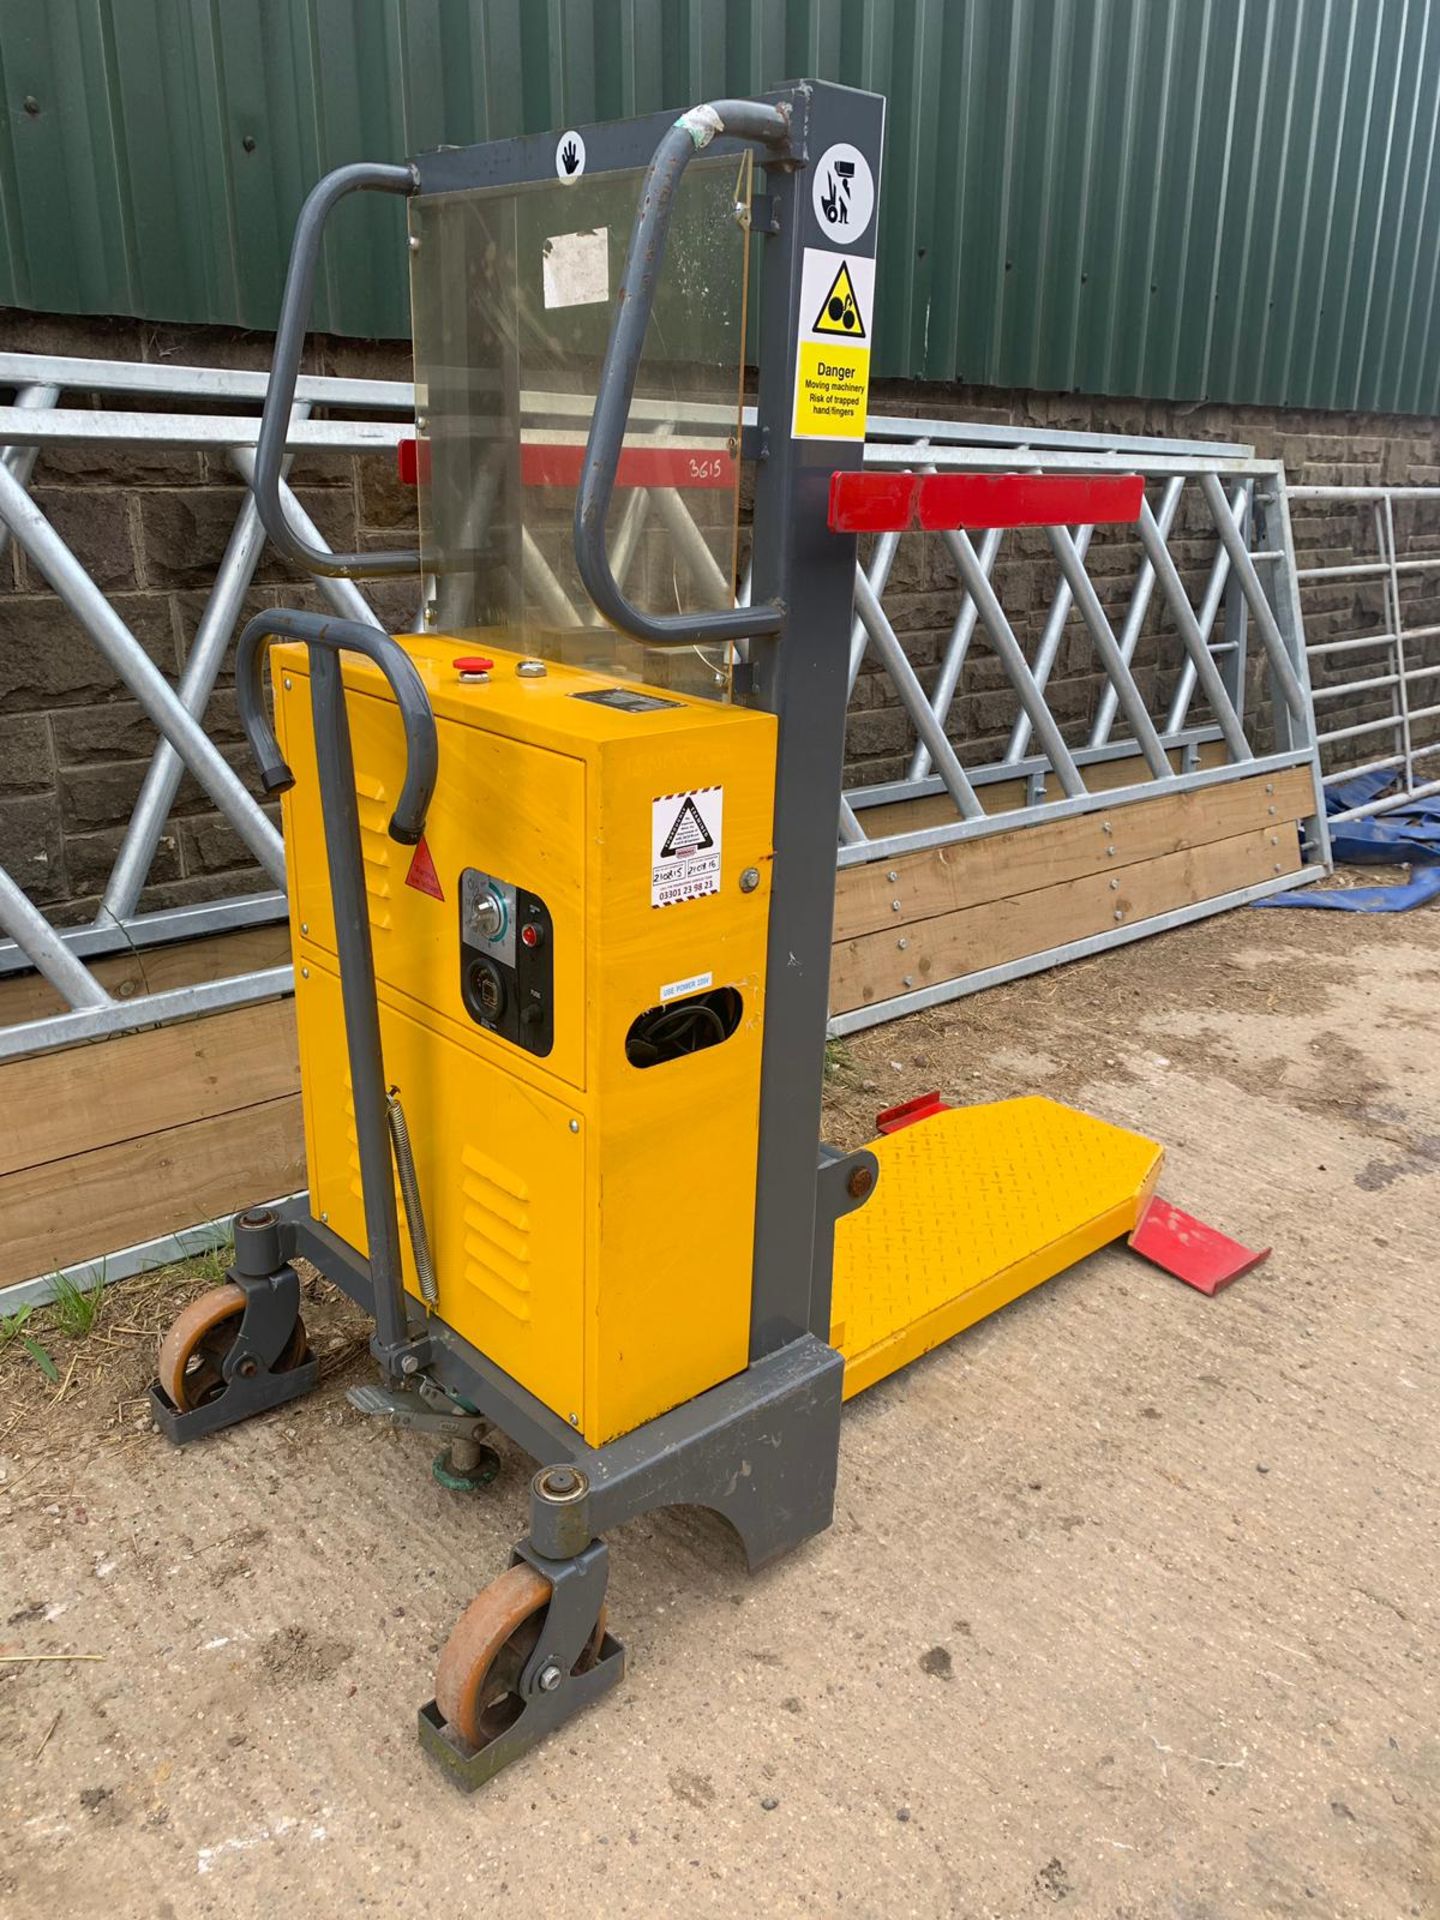 WARRIOR YM250 ELECTRIC PALLET TRUCK, WEIGHT 270 KGS, LIFT HEIGHT 1M, YEAR 2013 *PLUS VAT* - Image 8 of 9